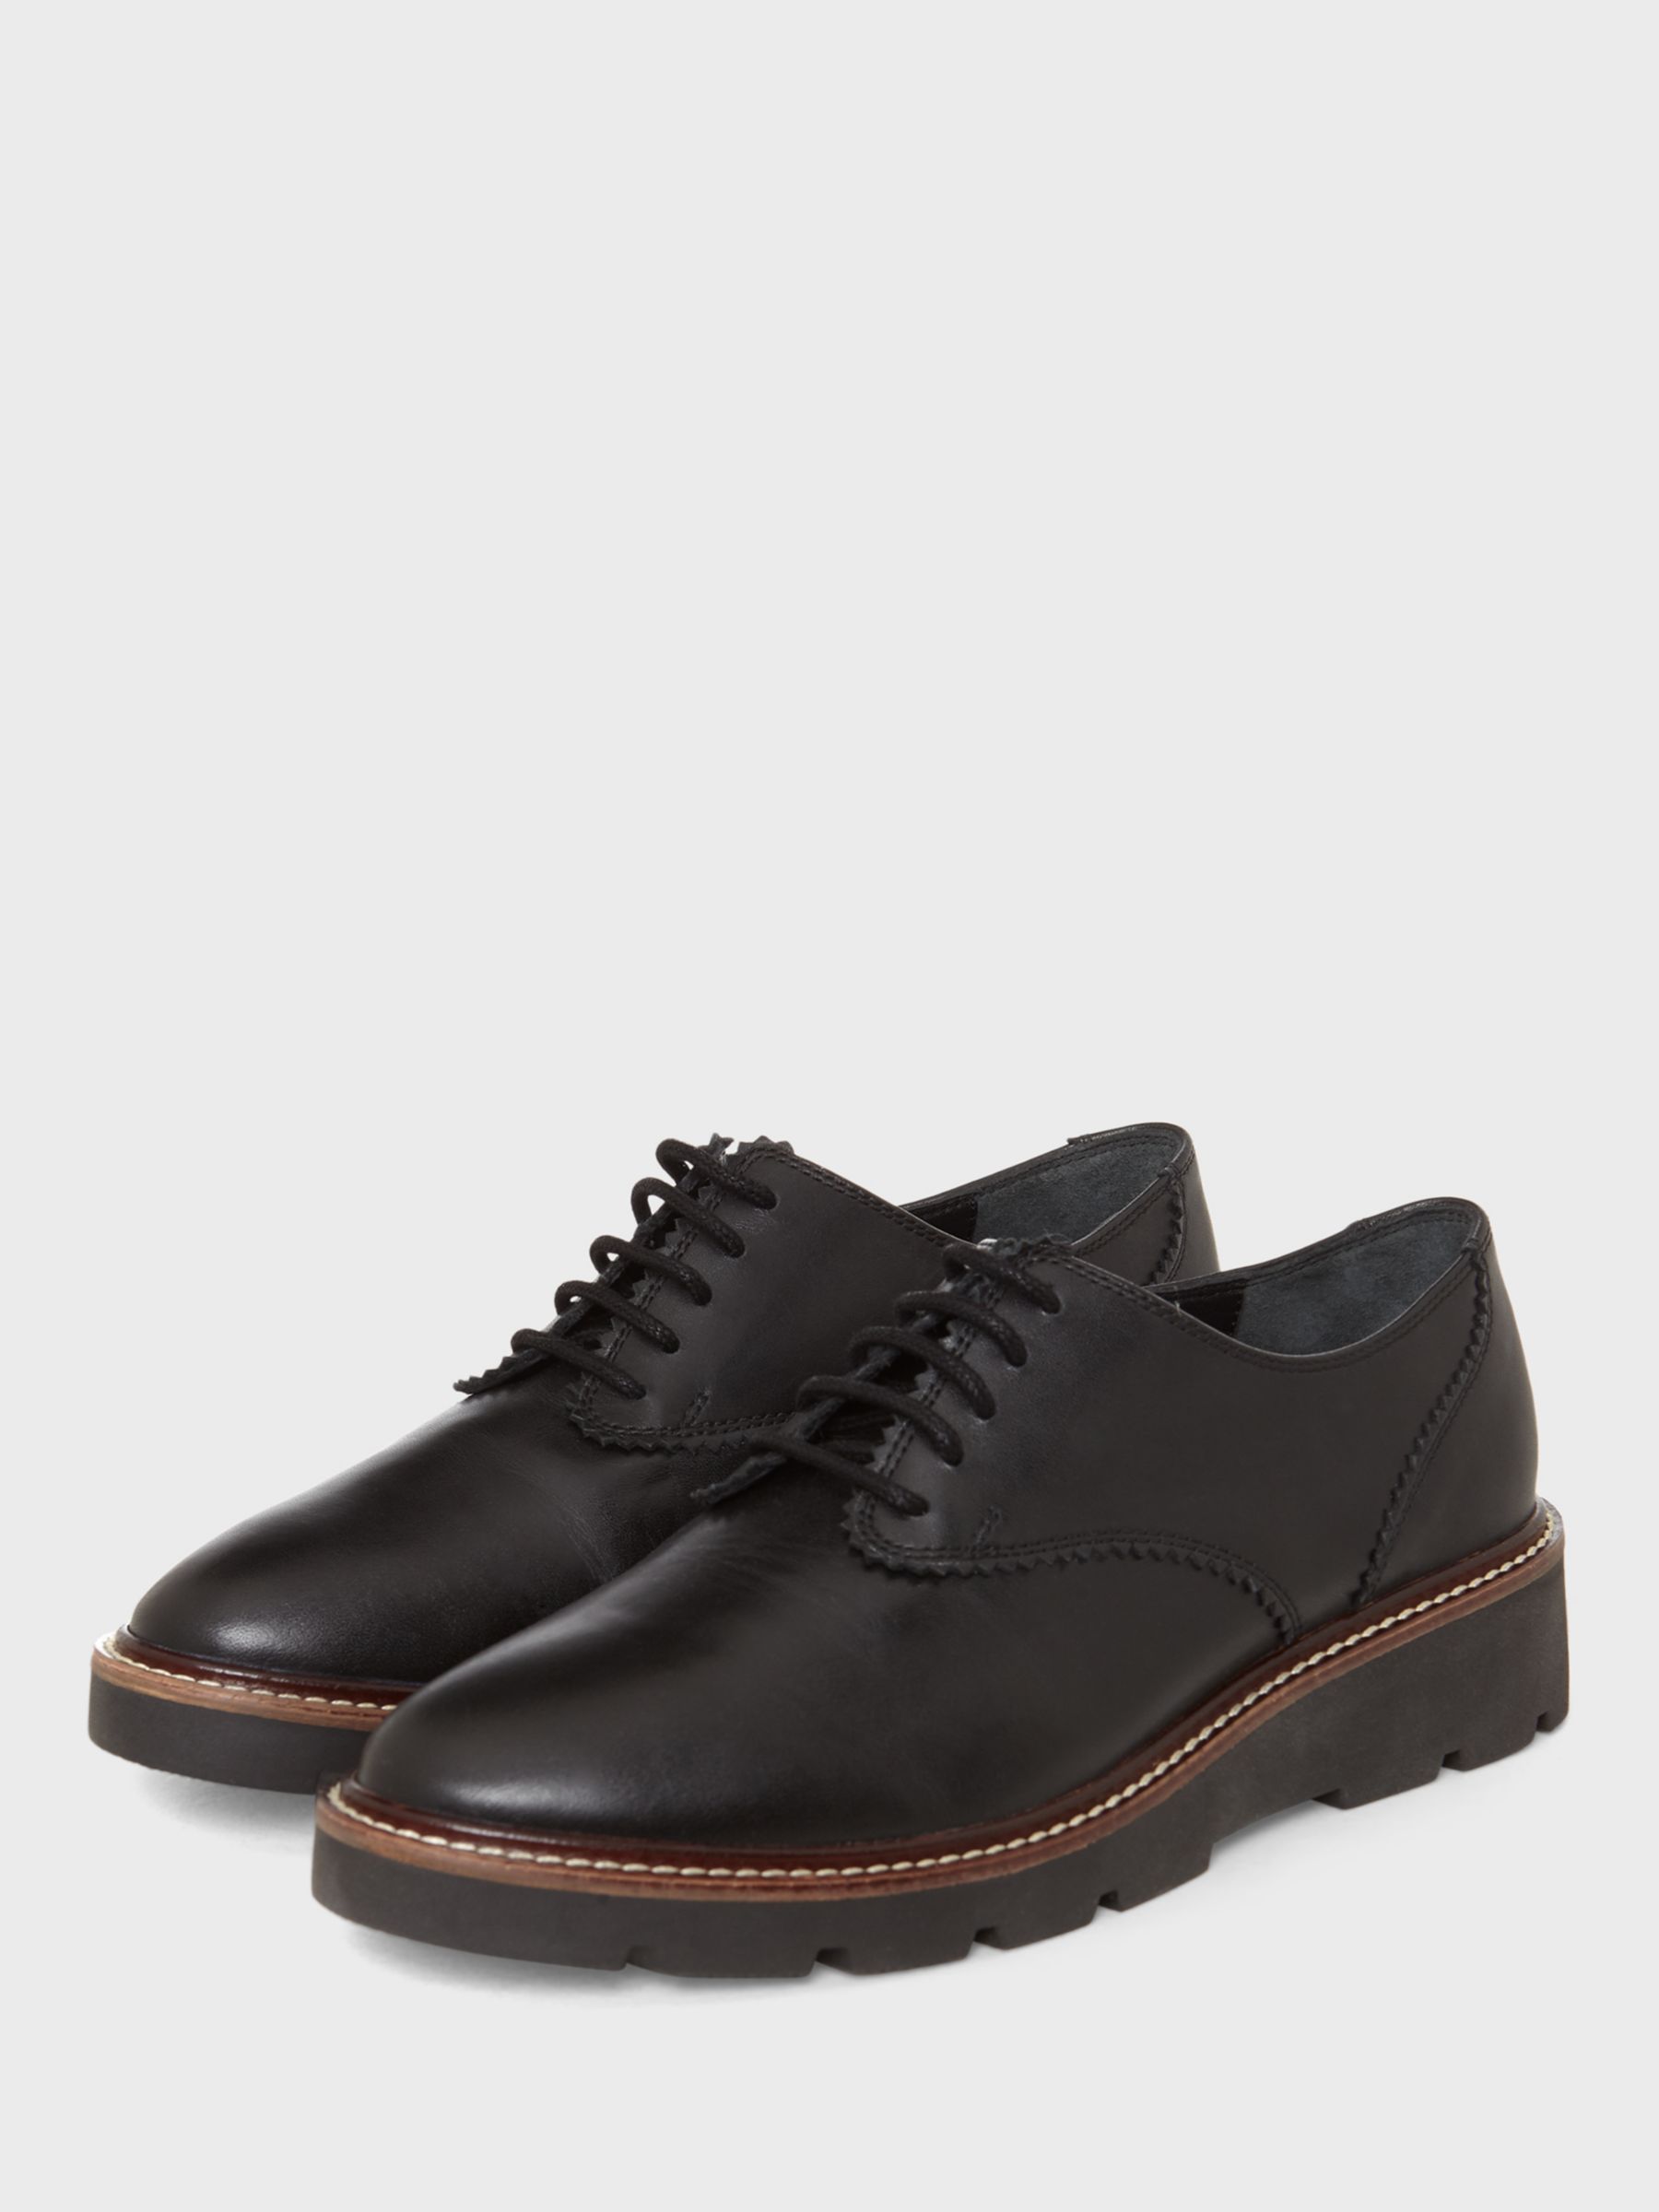 Buy Hobbs Chelsea Lace Up Leather Brogues, Black Online at johnlewis.com